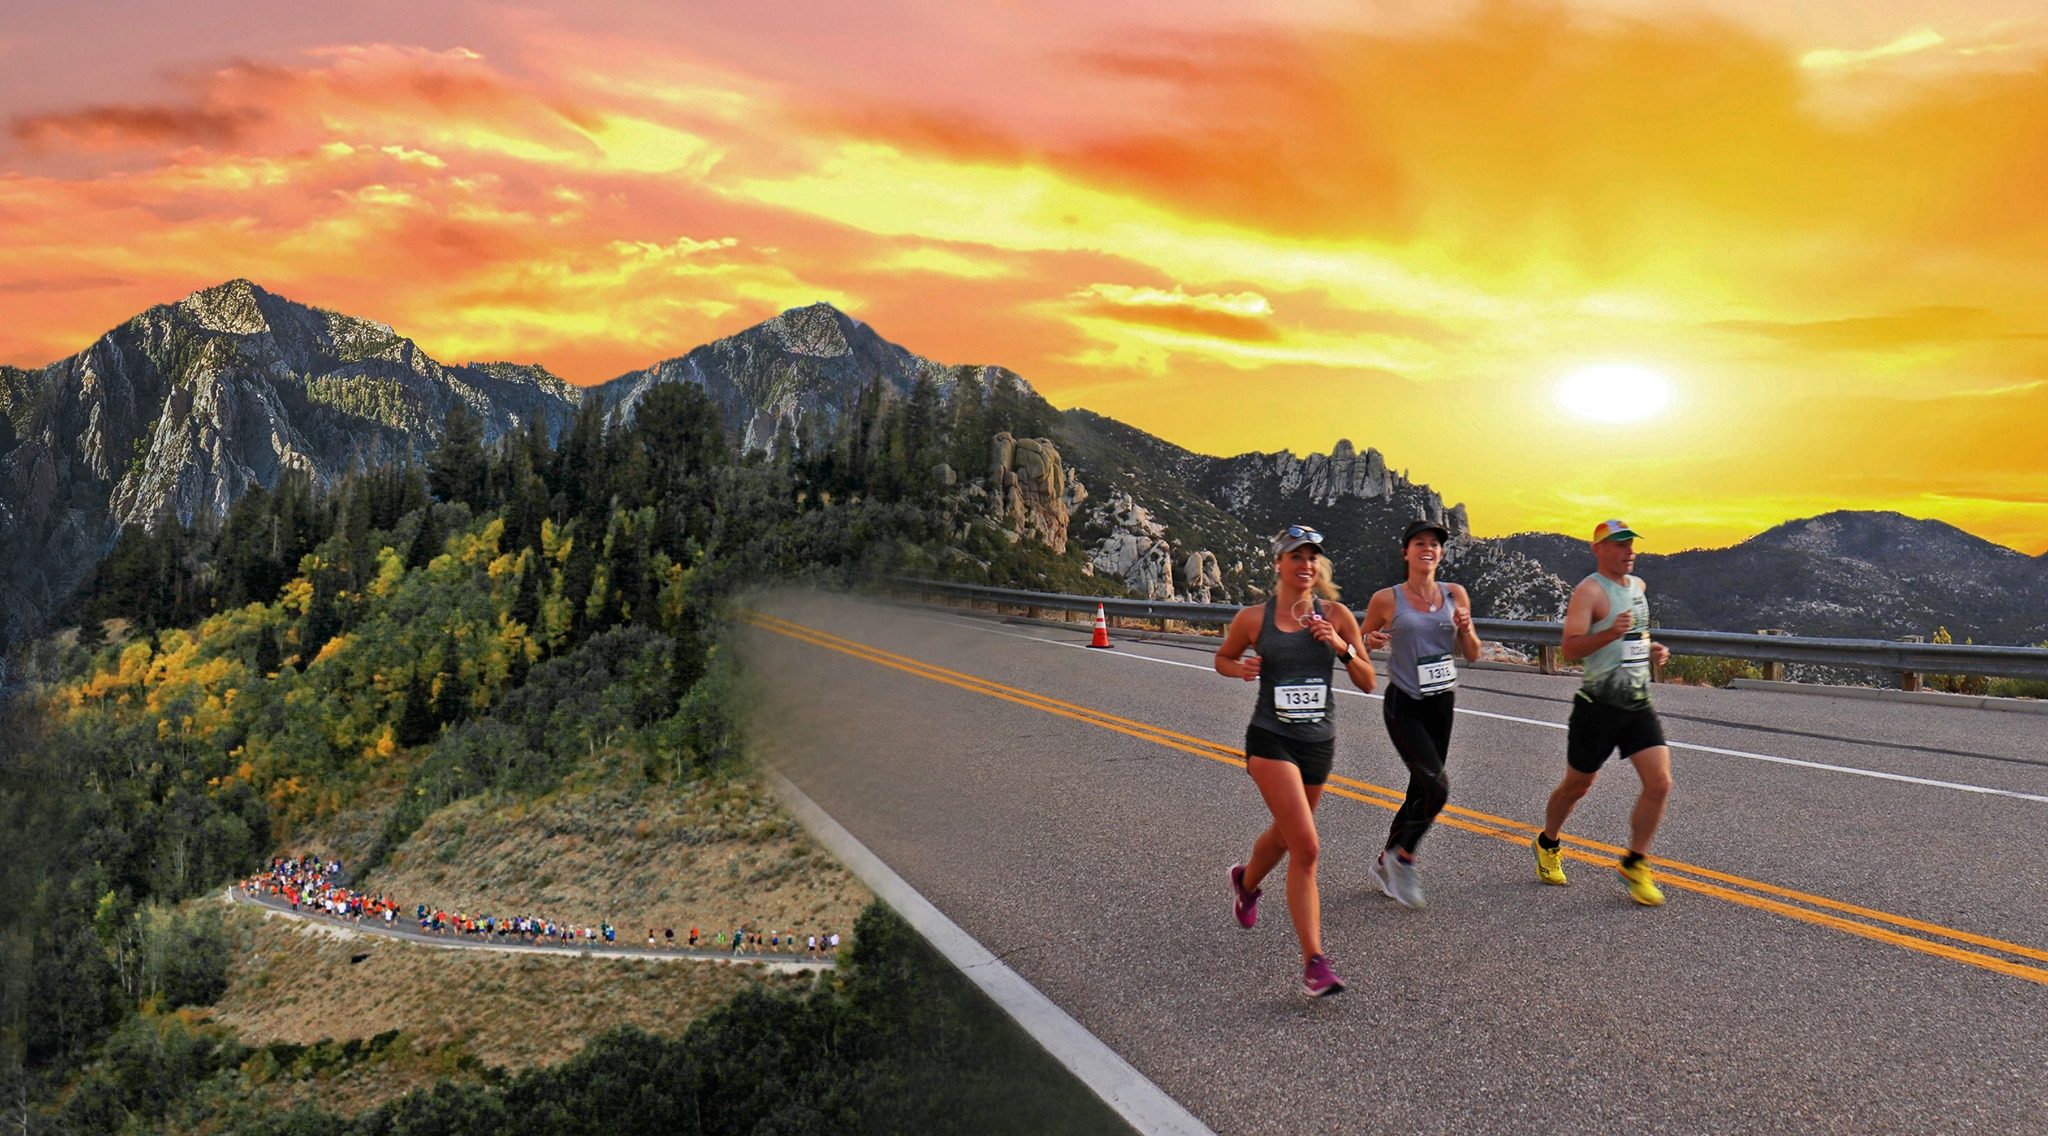 Know more about Best Revel Marathon in Big Bear